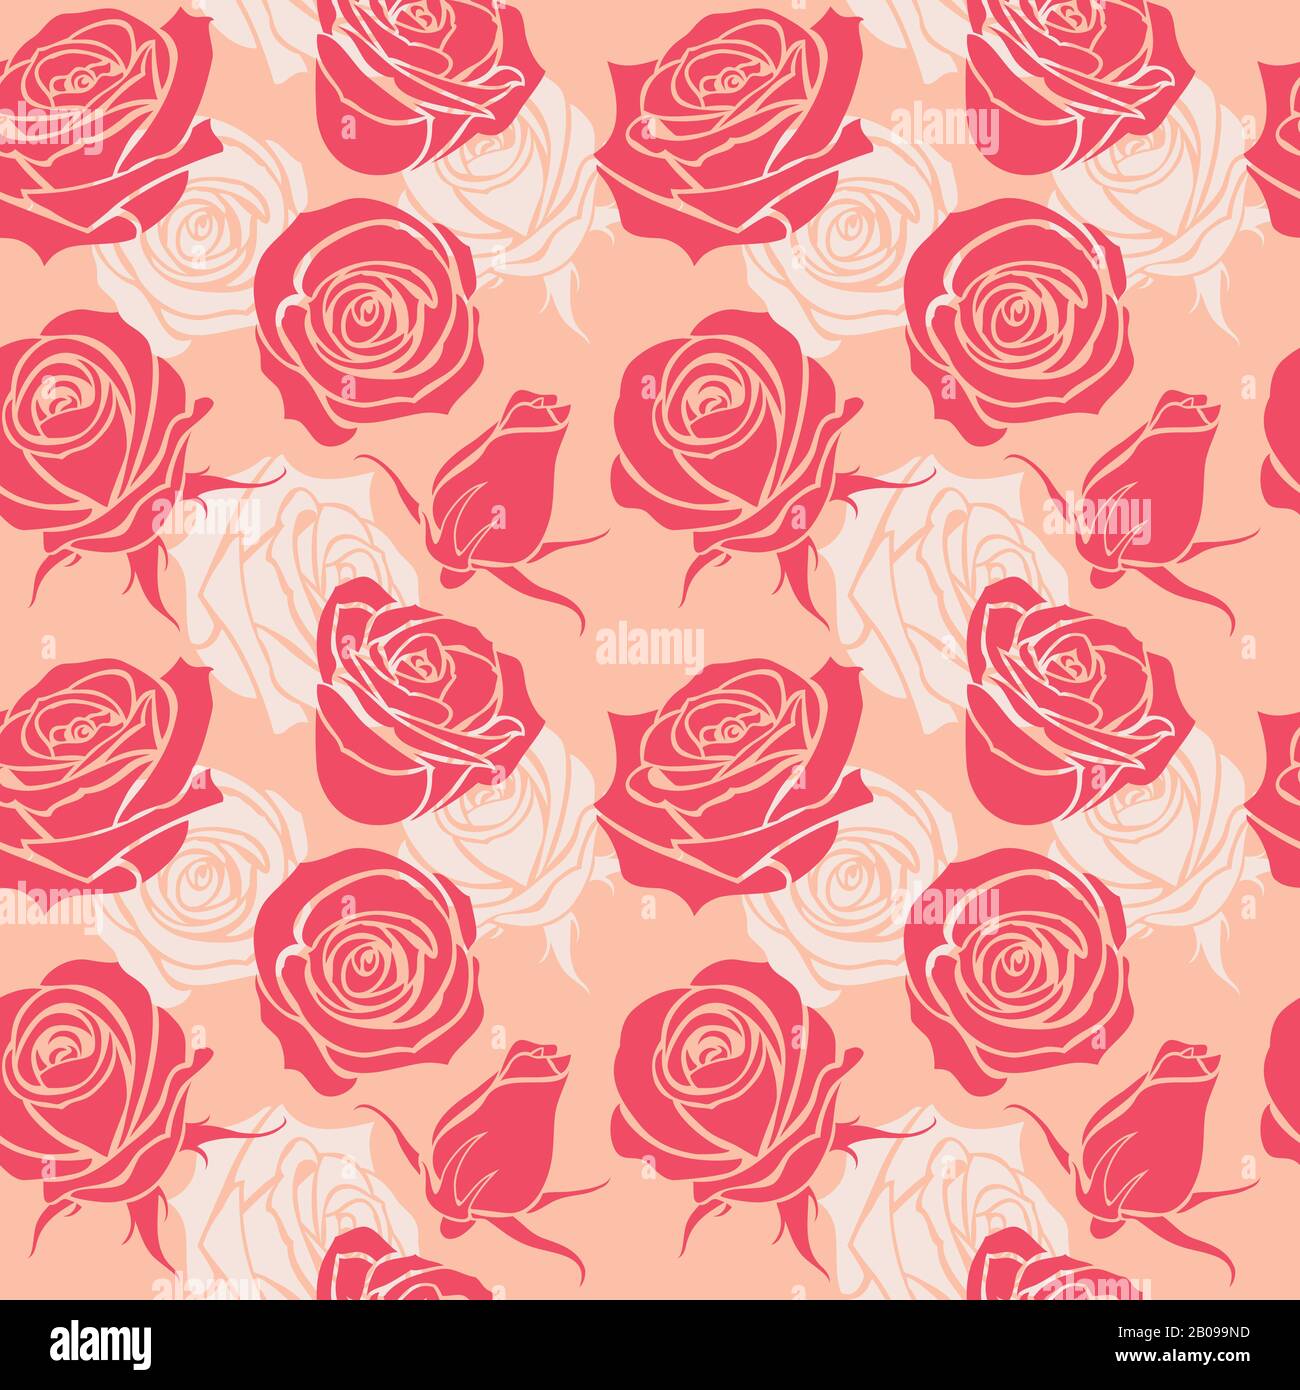 Seamless pattern with roses. vintage love abstract vector Background with pink rose, illustration of blossom roses Stock Vector